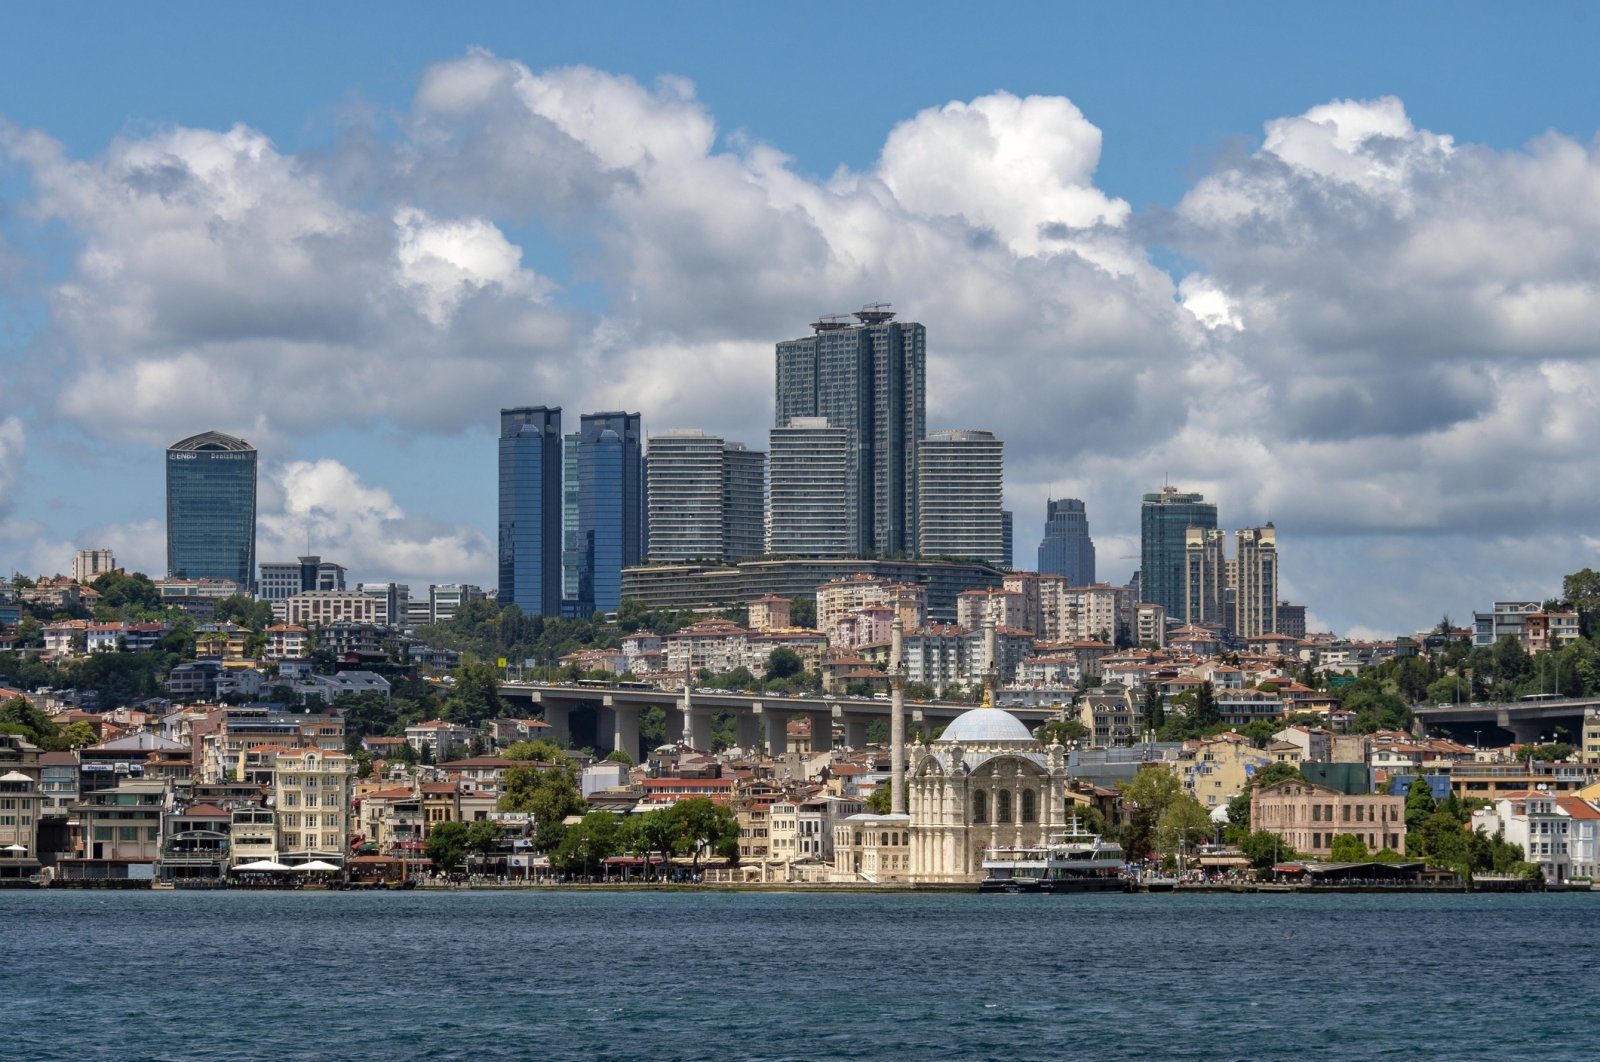 View of the Istanbul skyline with the backdrop of a commercial hub and Ortaköy Mosque, Türkiye. (Getty Images Photo)